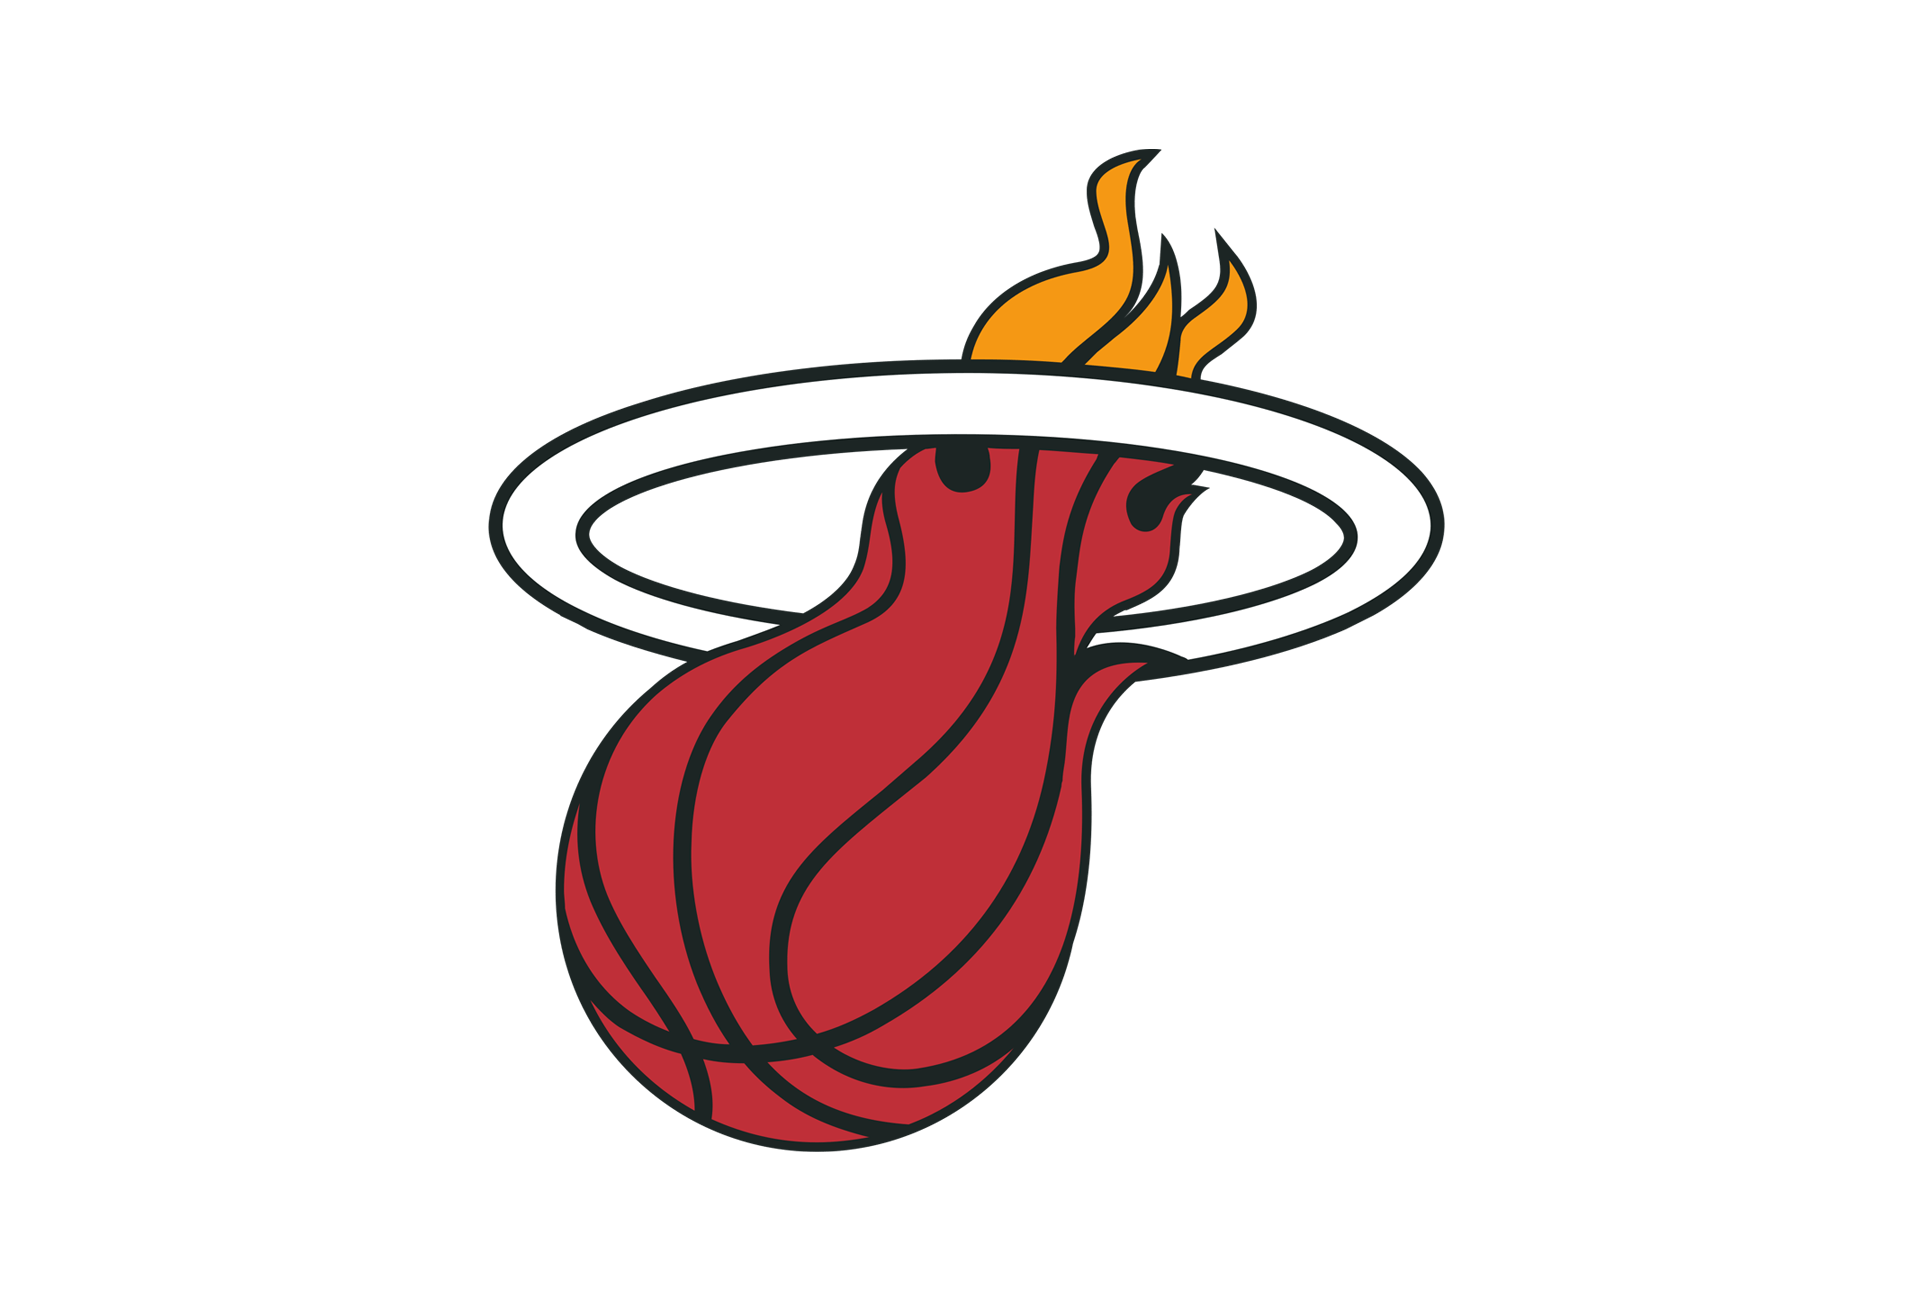 Heat Logo - Miami Heat Logo, Miami Heat Symbol, Meaning, History and Evolution